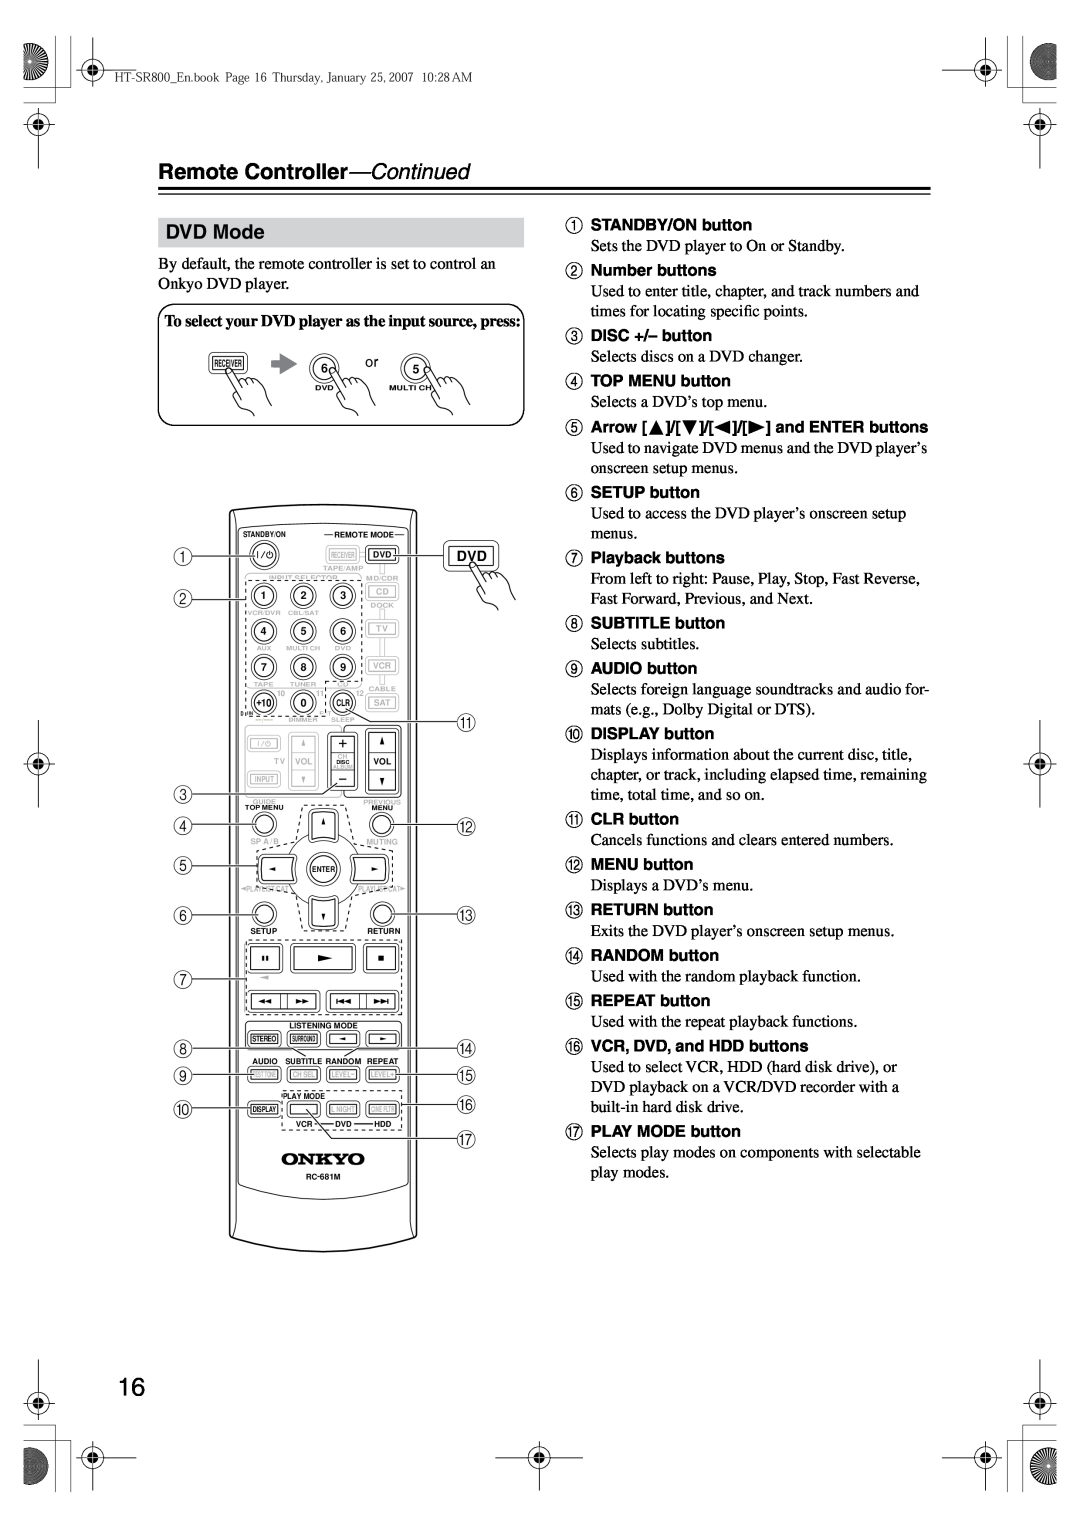 Onkyo HT-SR800 instruction manual DVD Mode, 1 2 3 4 5 6 7 8 9 J, Remote Controller-Continued 